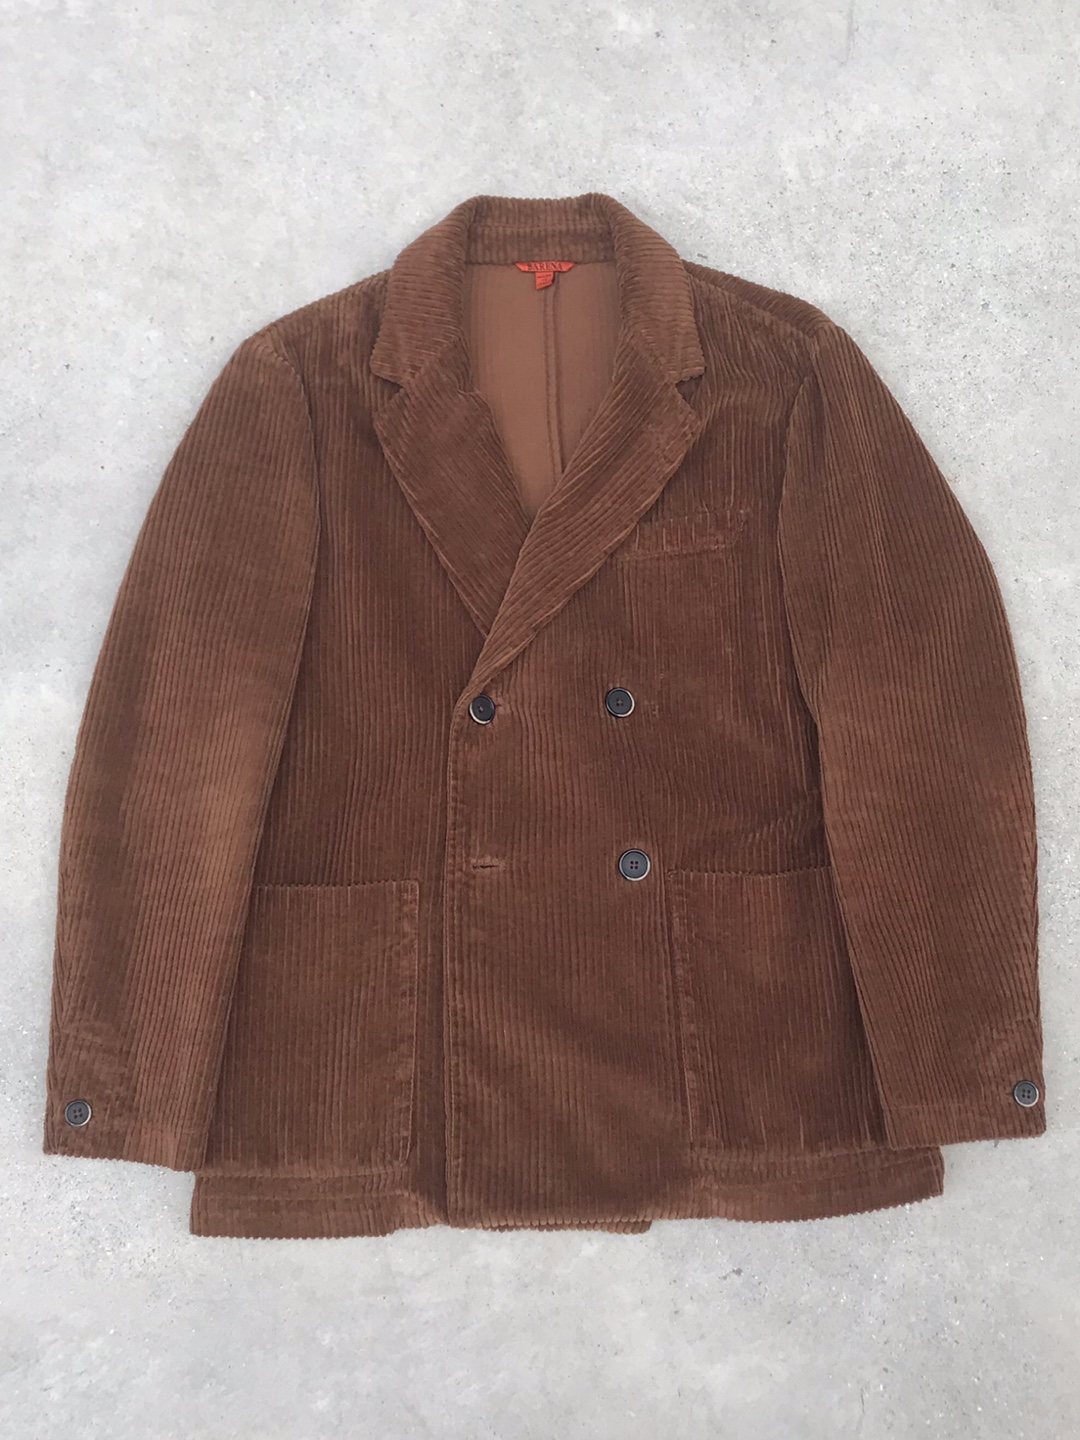 barena venezia corduroy double breasted suit Italy made (46 size, 실측 참고)